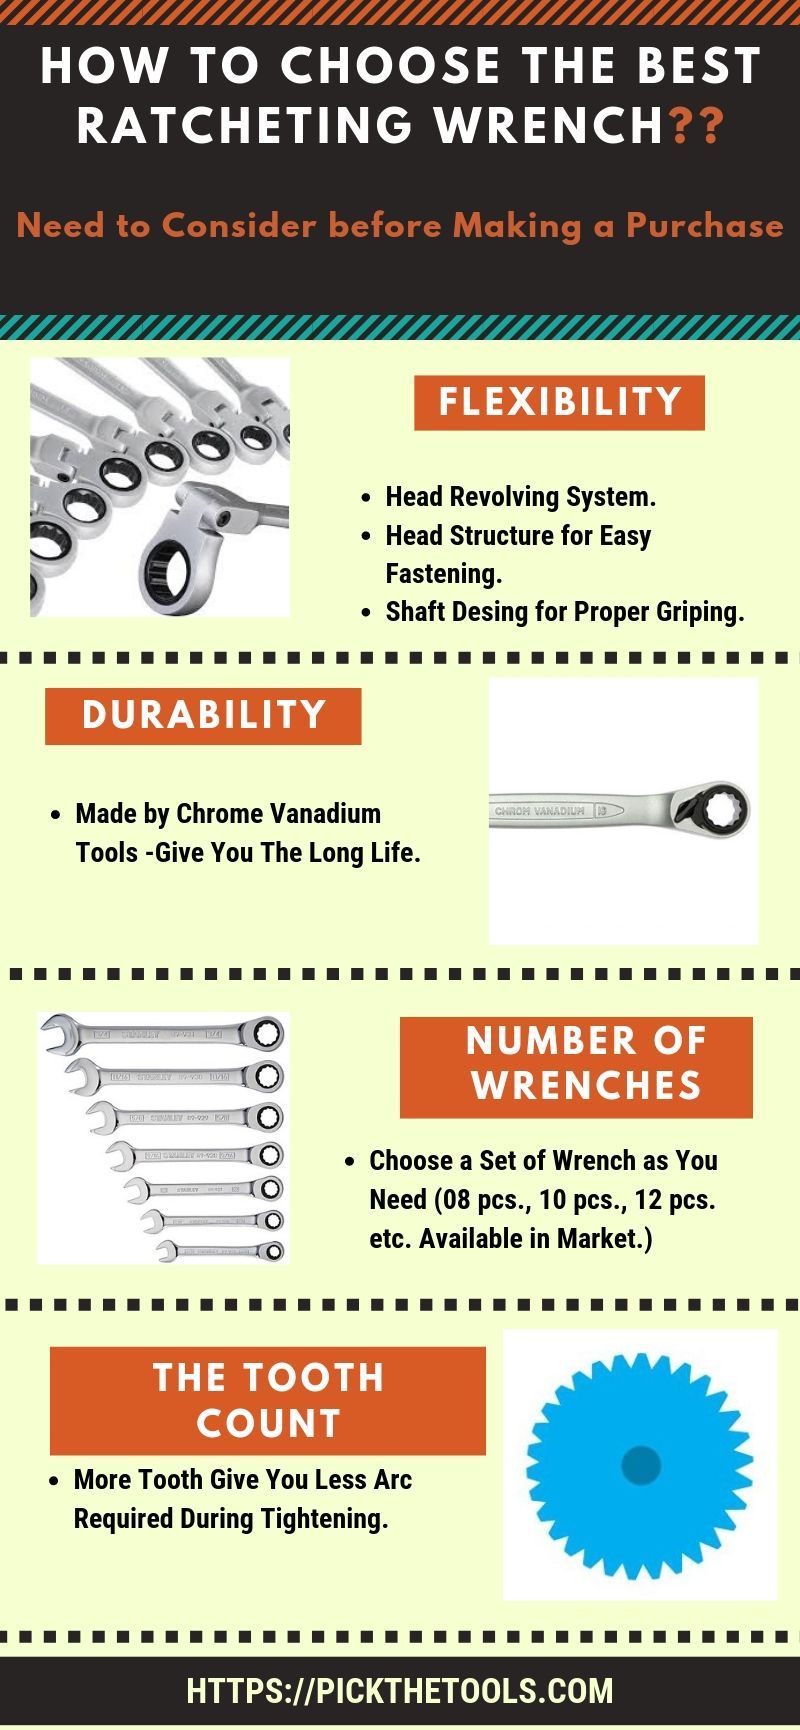 How to choose the best ratcheting wrench (1)